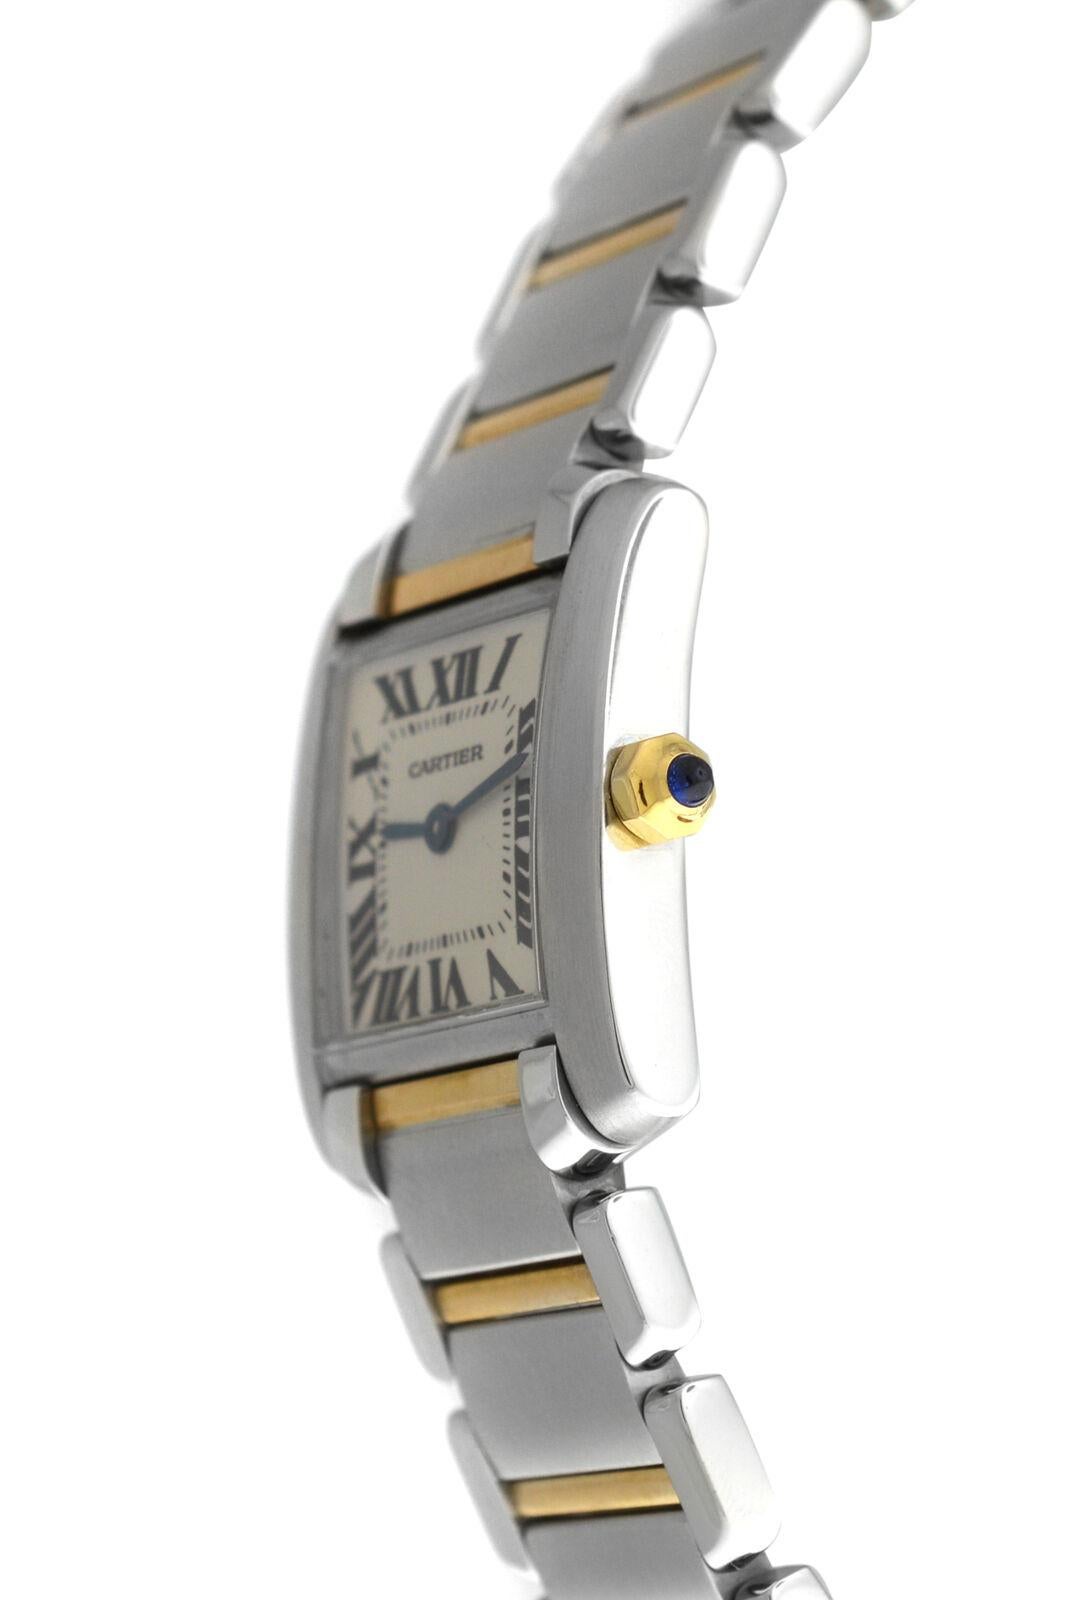 Brand	Cartier
Model	Tank Francaise 2300
Gender	Ladies
Condition	Pre-owned
Movement	Swiss Quartz
Case Material	Stainless Steel & 18K Yellow Gold
Bracelet / Strap Material	
Stainless Steel & 18K Yellow Gold

Clasp / Buckle Material	
Stainless Steel &